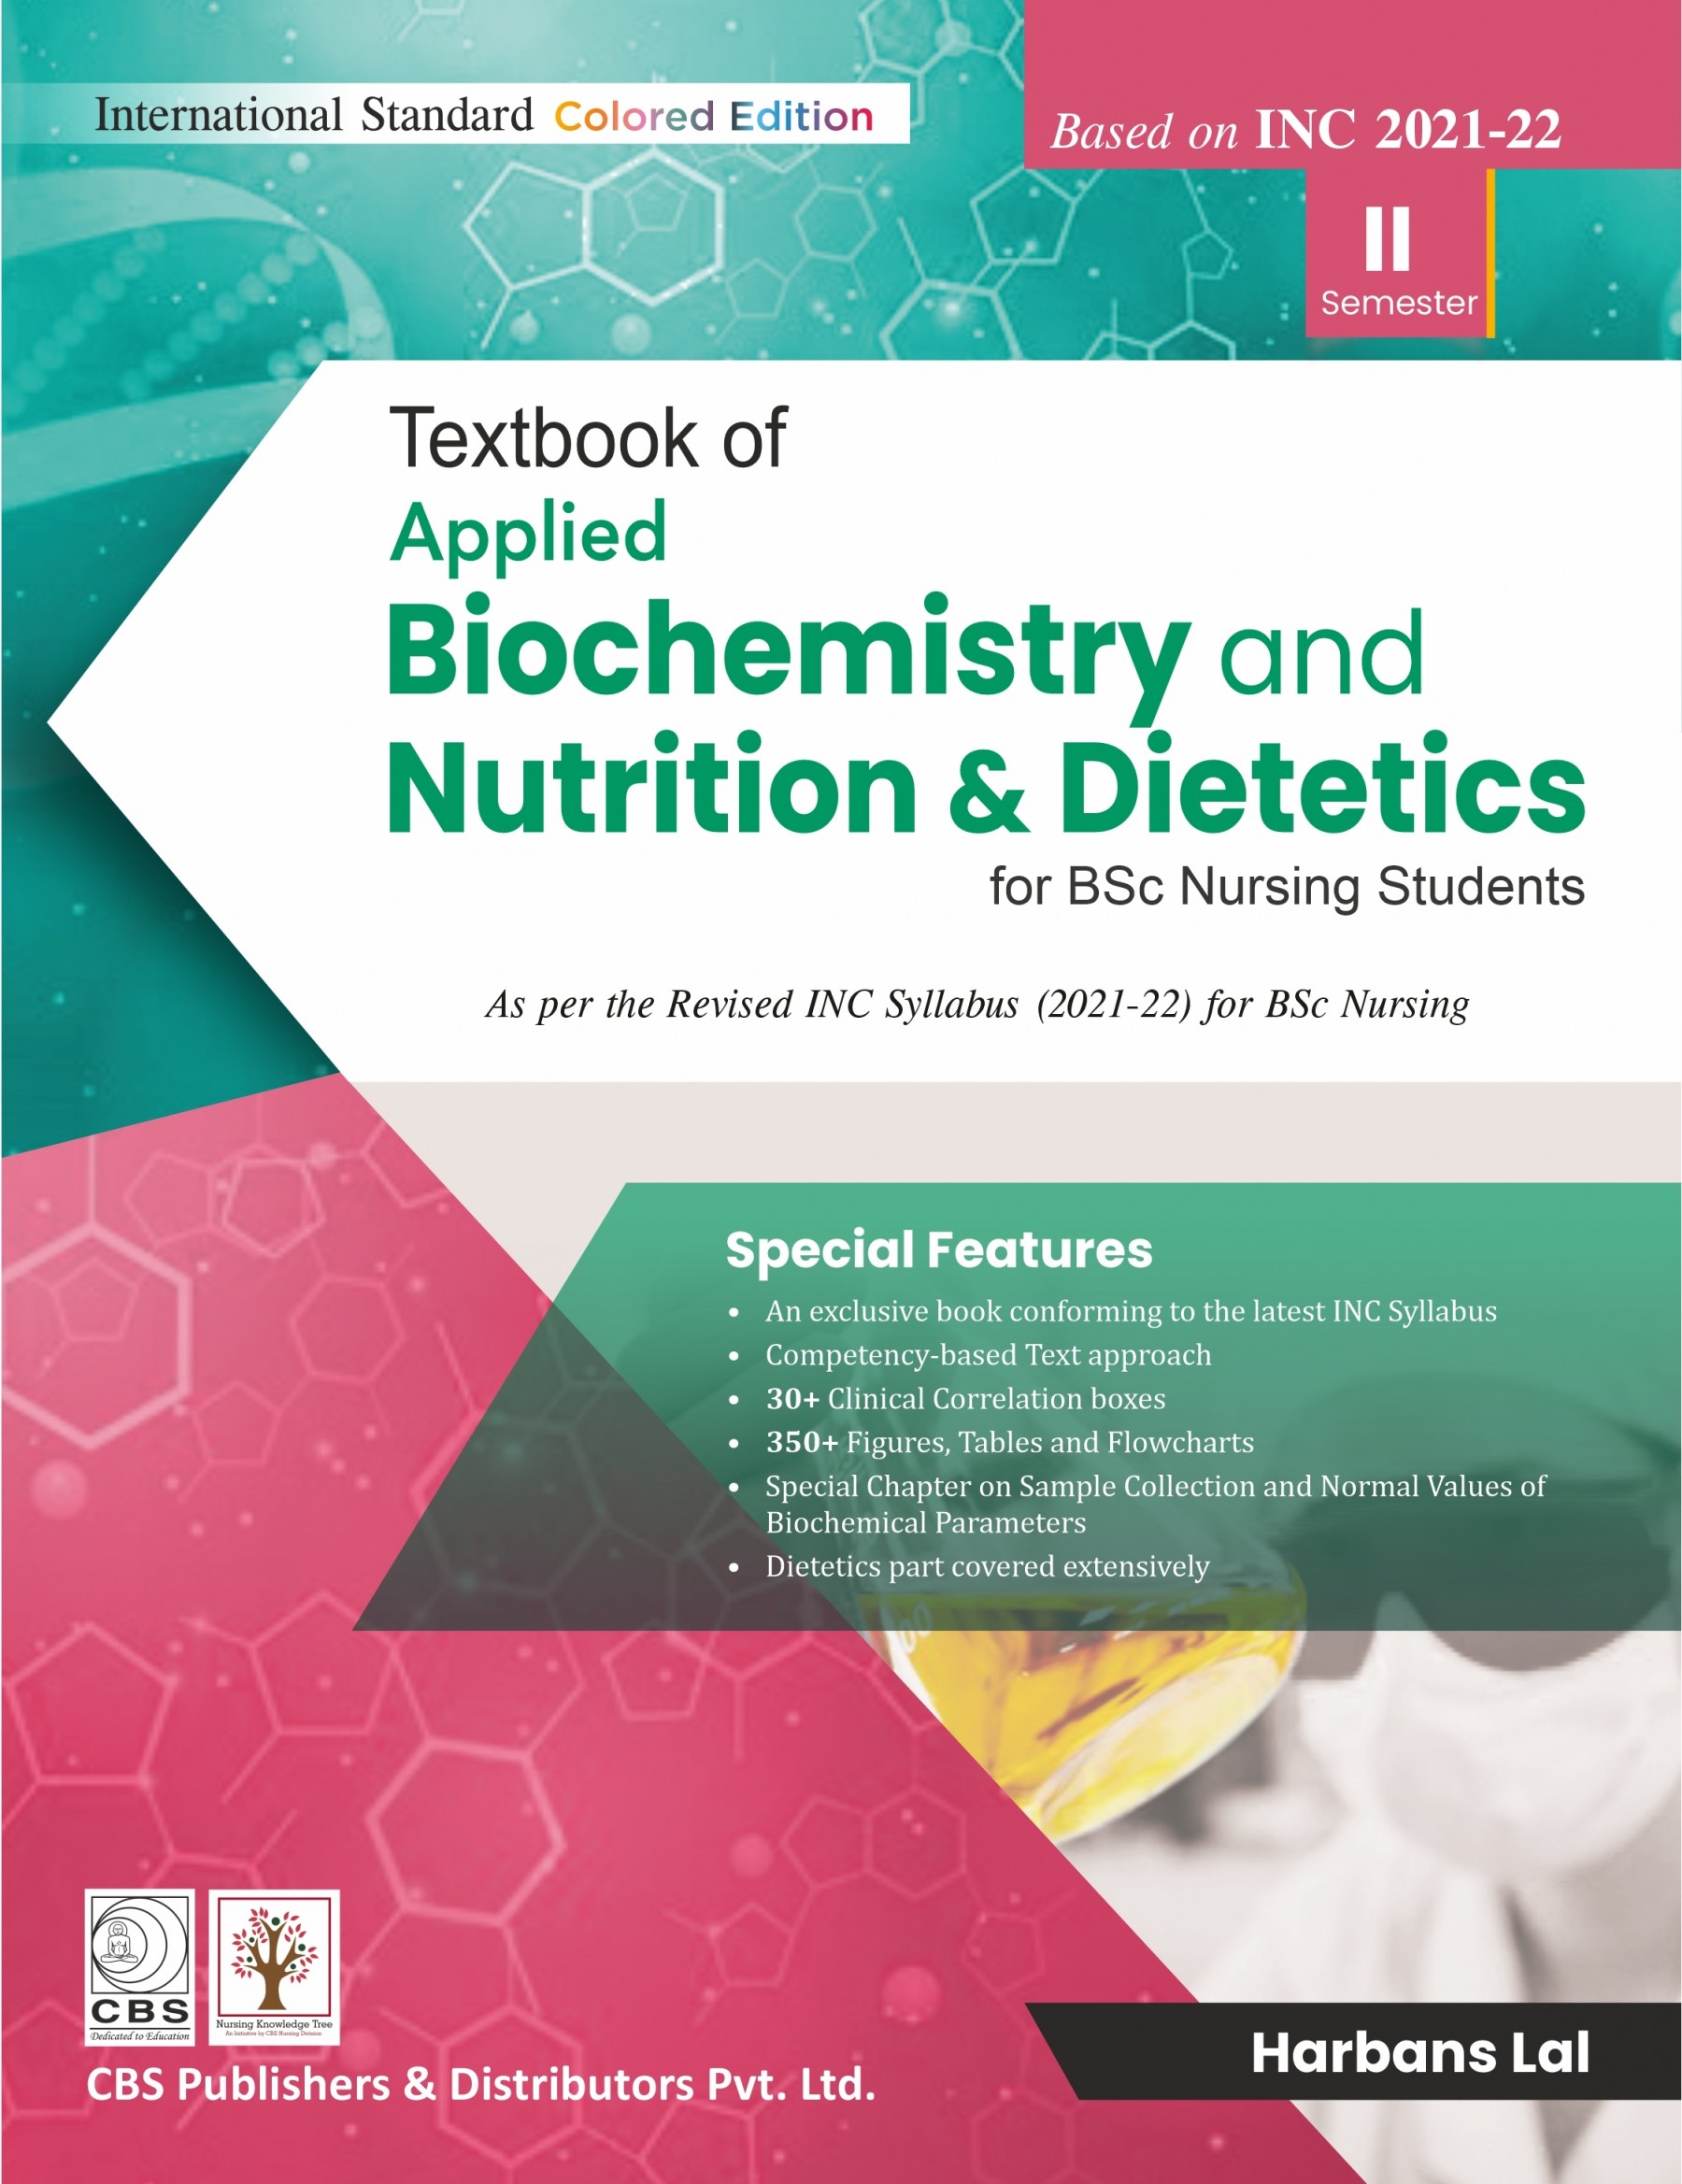 Textbook of Applied Biochemistry and Nutrition & Dietetics for BSc Nursing (Based on INC 2021-22)